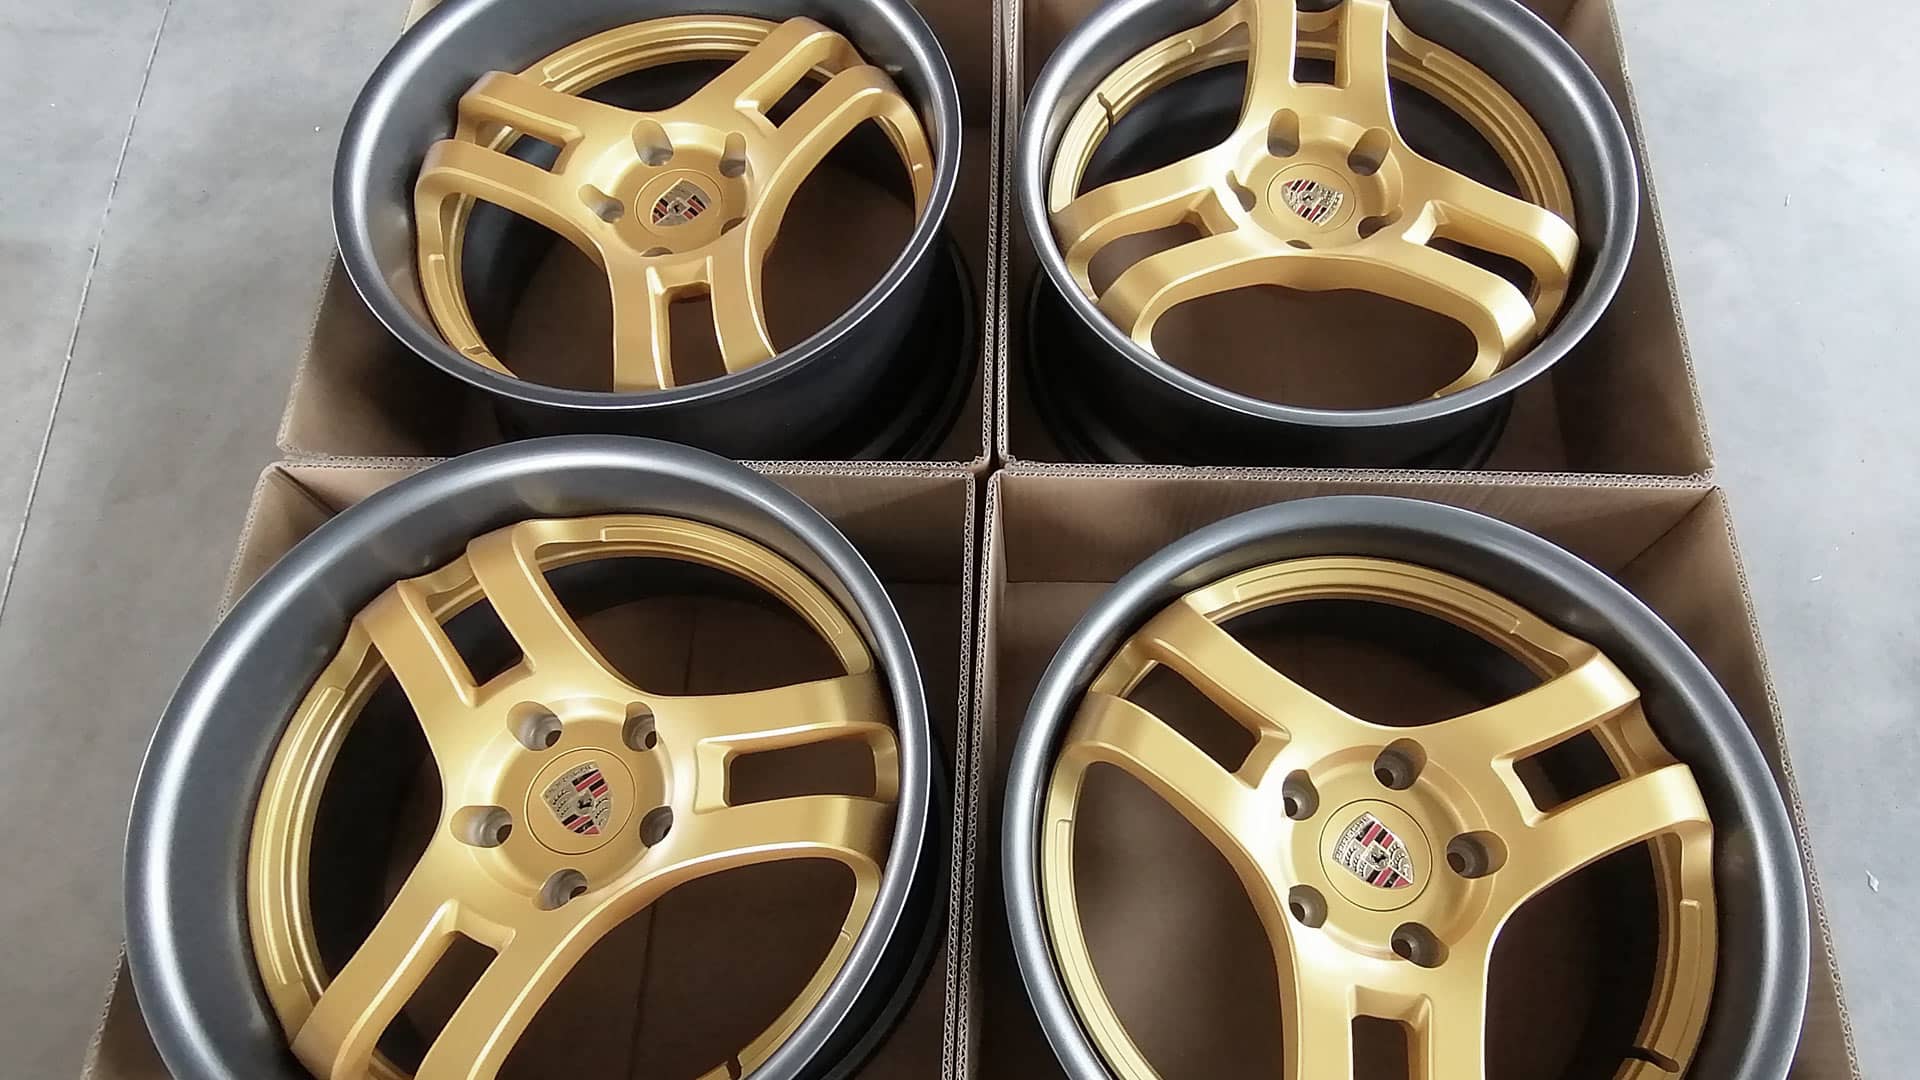 Numerous 19 inch Custom Forged Wheels in 2-piece build with satin gunmetal and satin gold finish sitting on warehouse floor